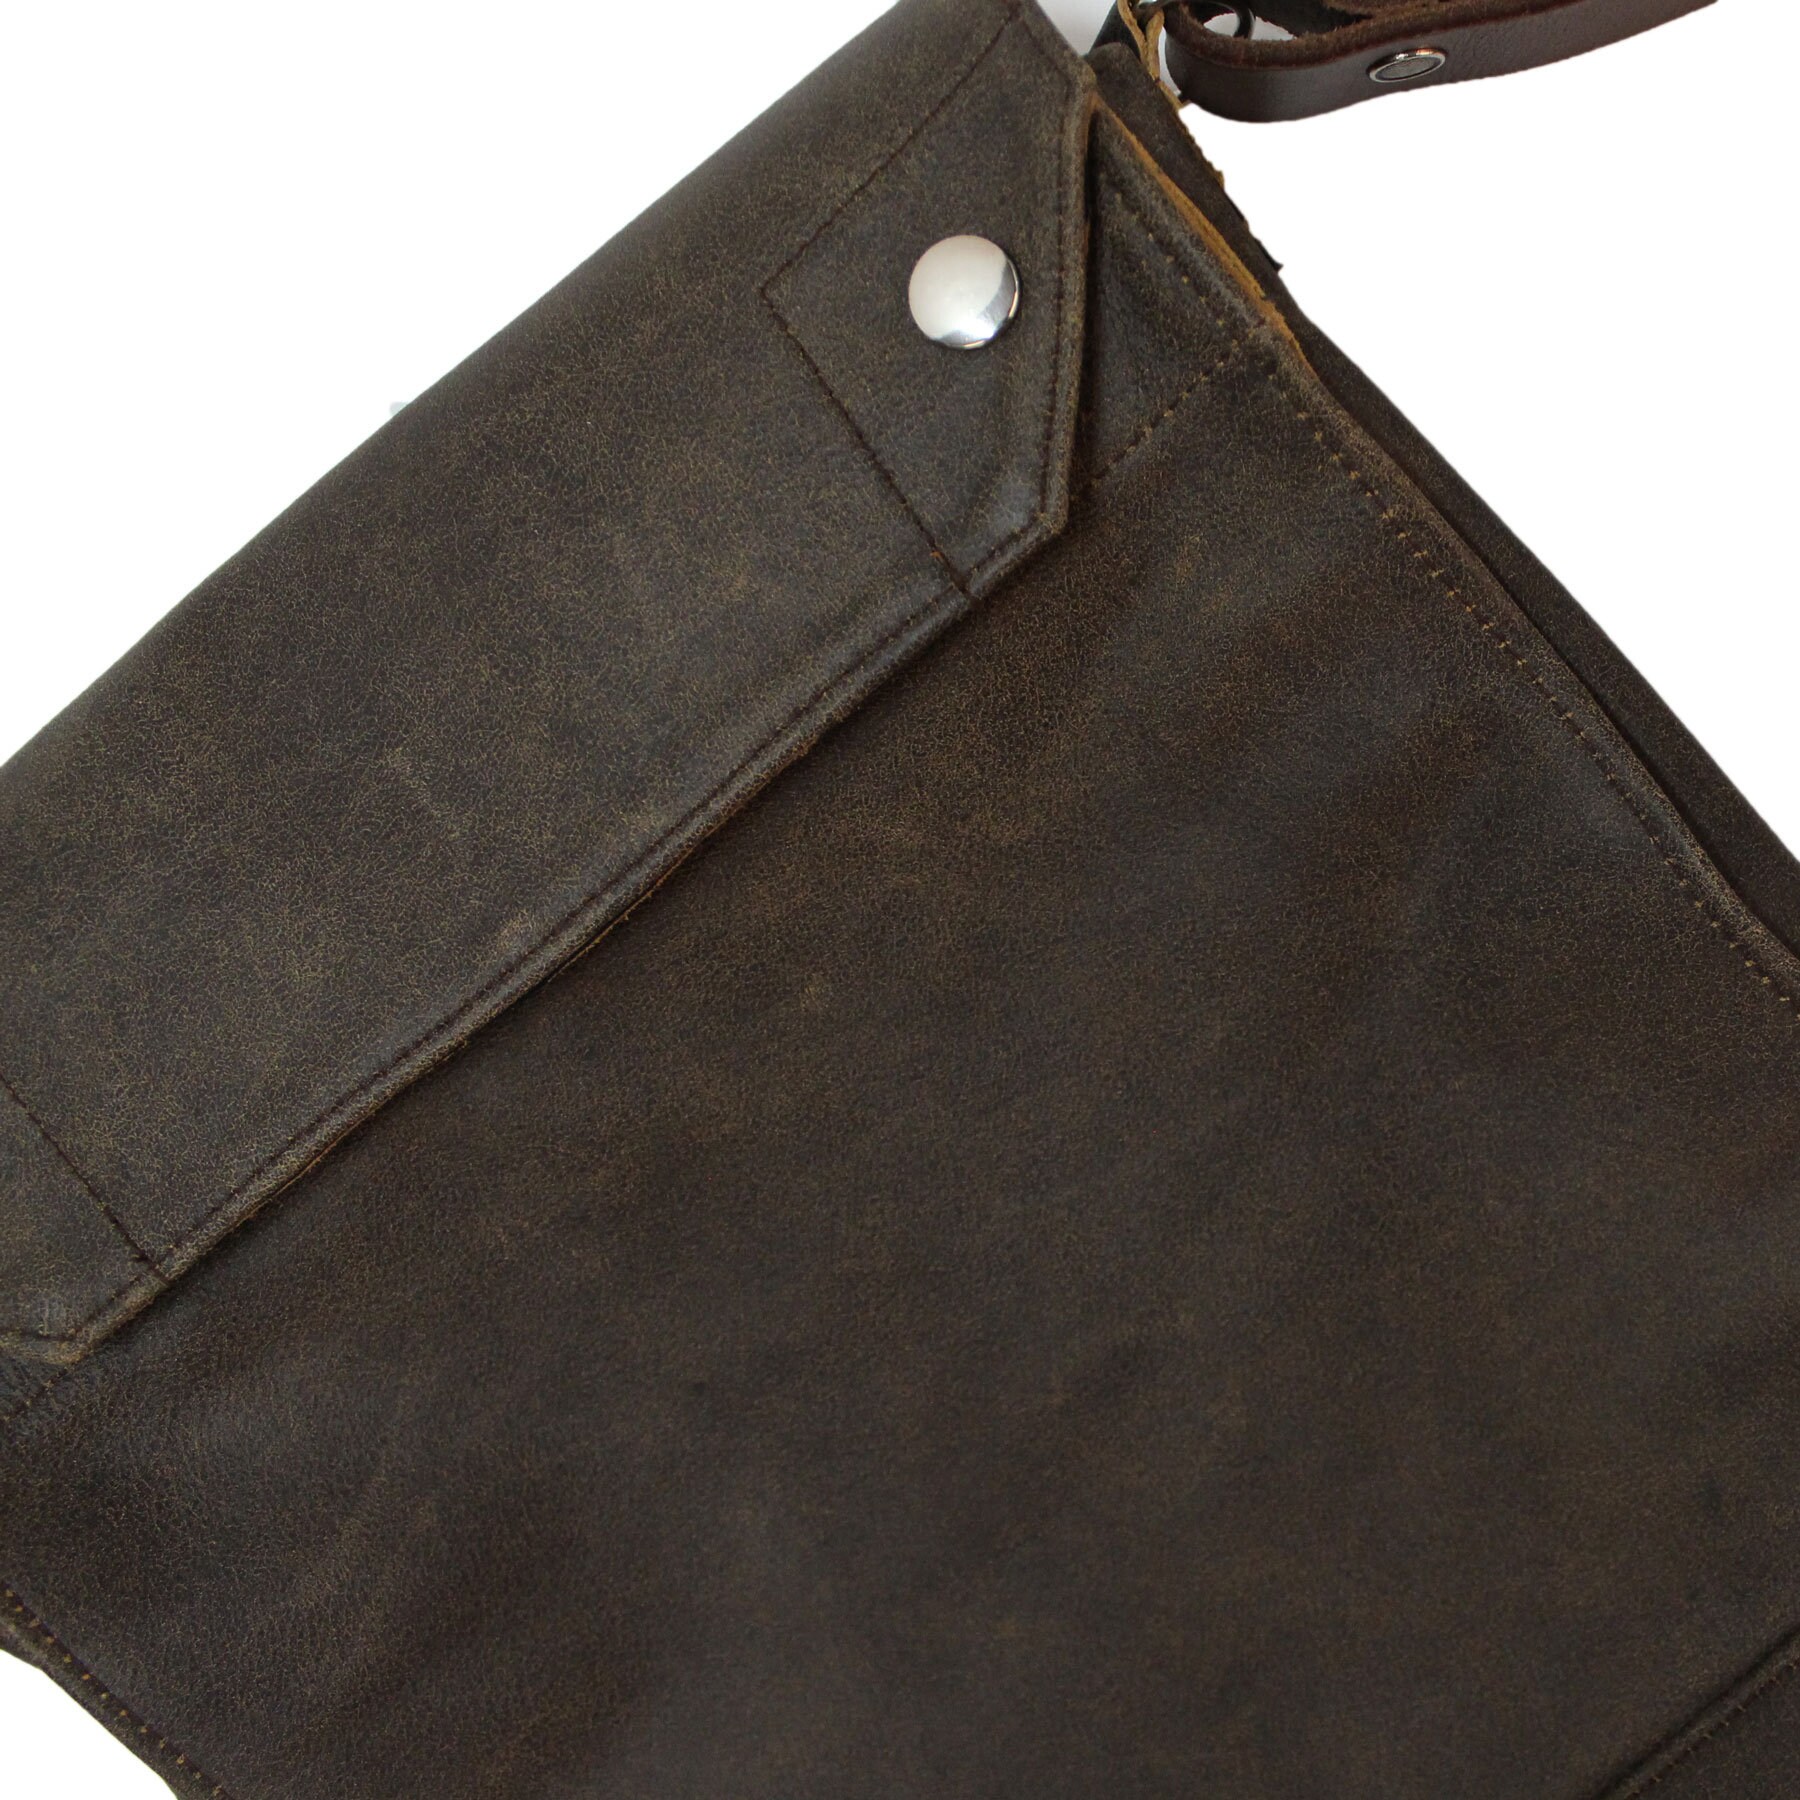 Indiana Jones Style Bags — High On Leather